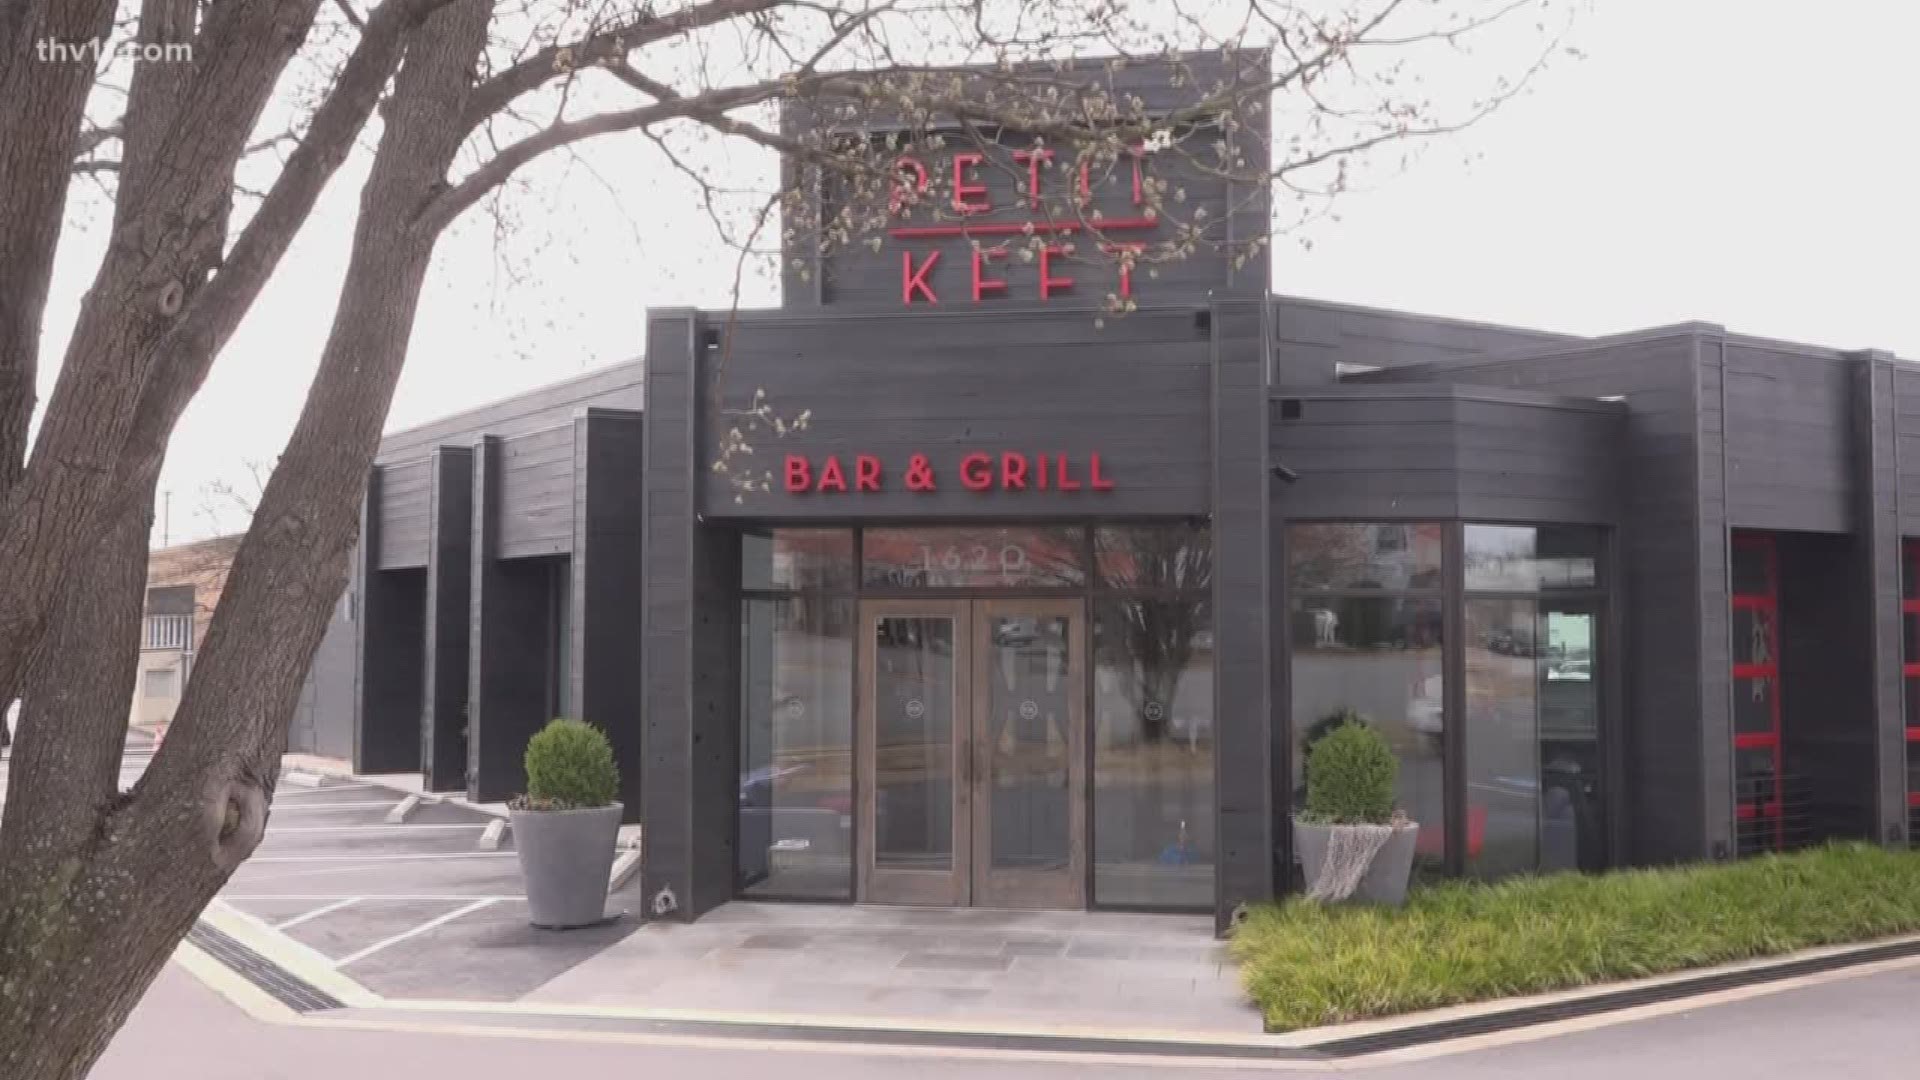 Starting tonight, one Little Rock restaurant is on a mission to help the employees of Red Bar, which was consumed by flames last week in Grayton Beach, Florida.